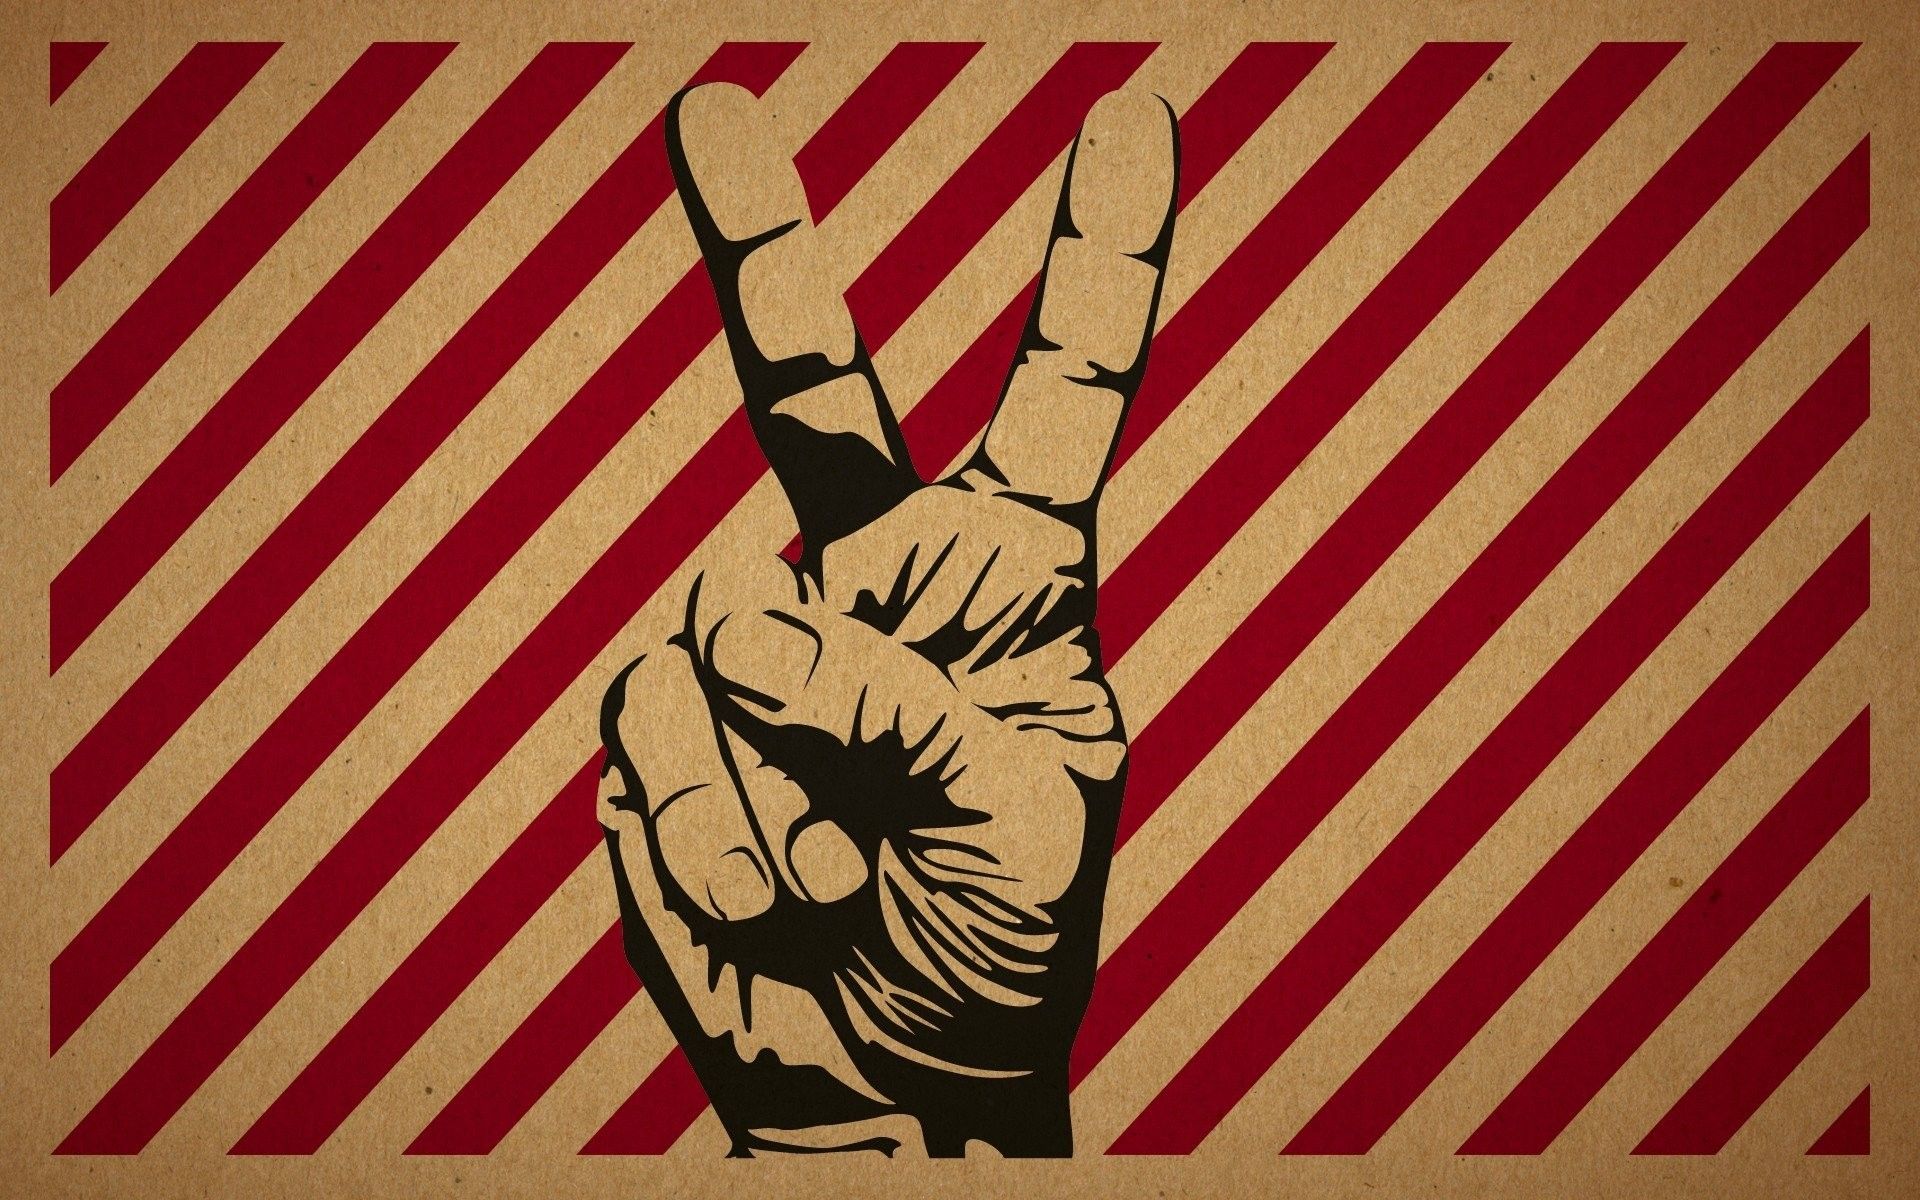 A hand making the peace sign on red and white stripes - Peace